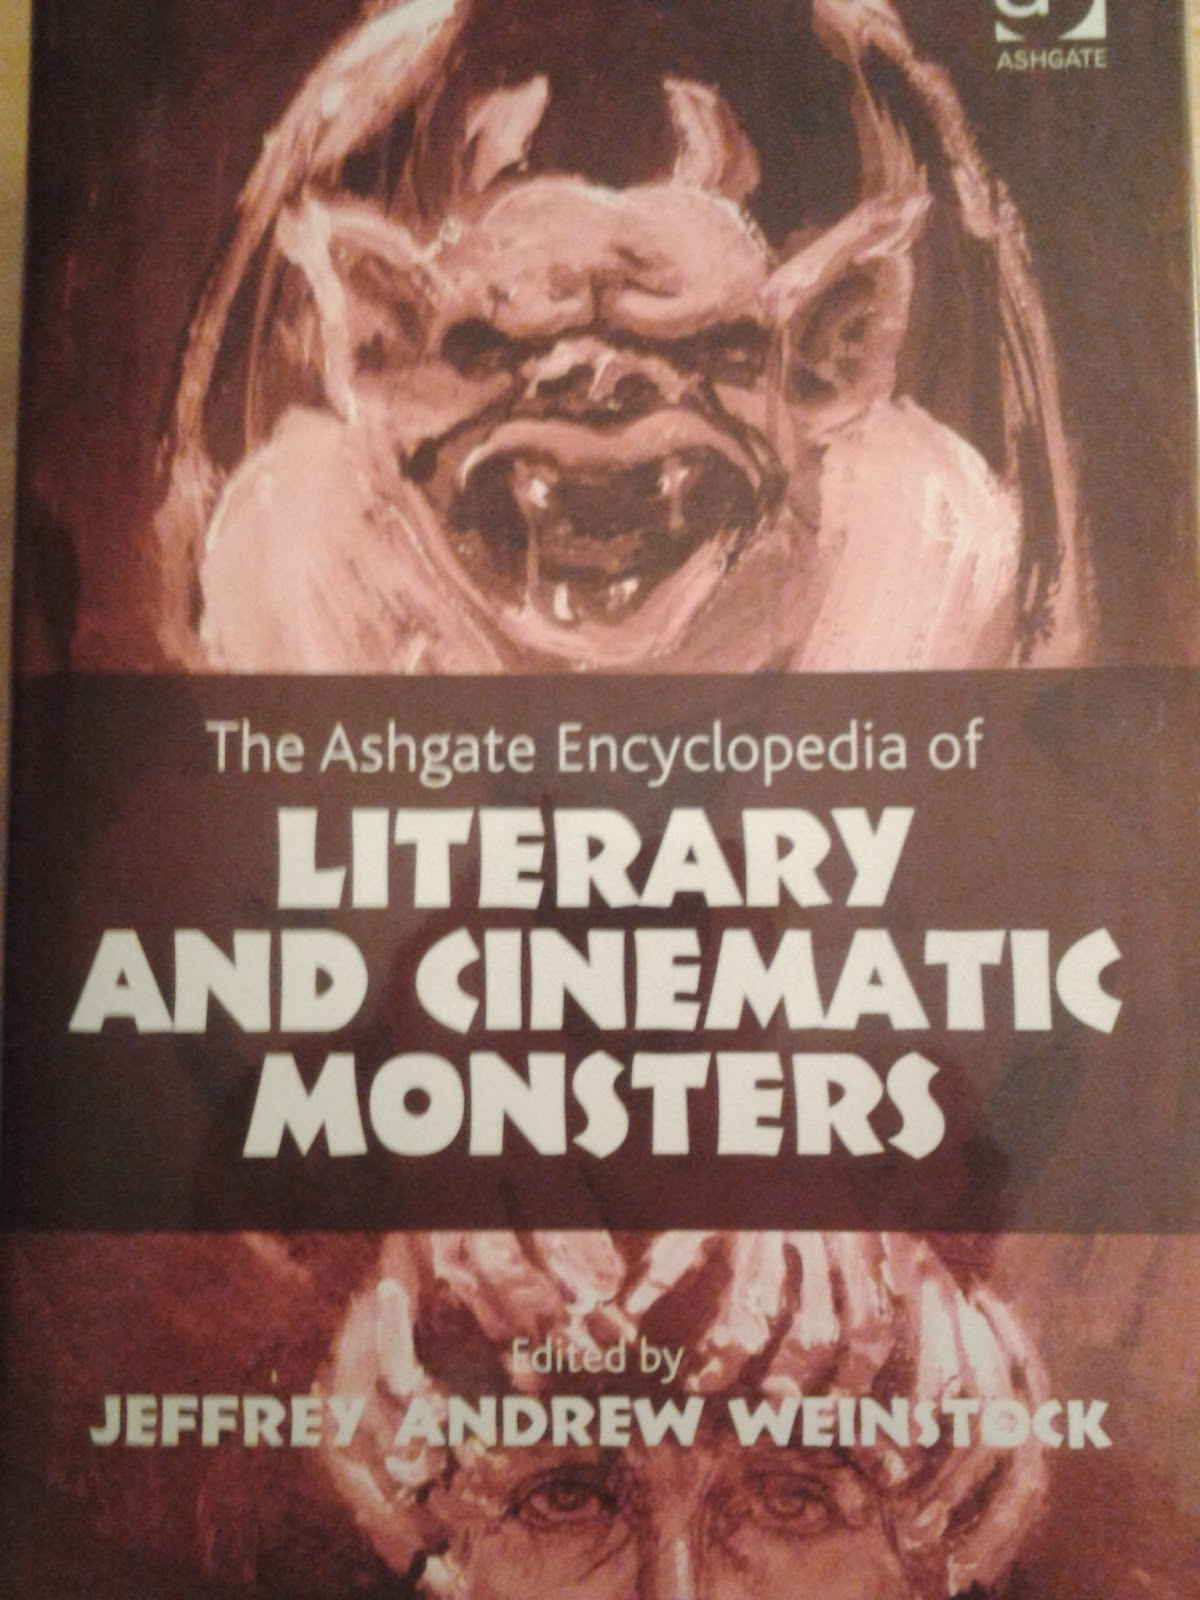 The Ashgate Encyclopedia of Literary and Cinematic Monsters, ed by Dr. Jeffrey Weinstock from Ashgate Publishing Ltd